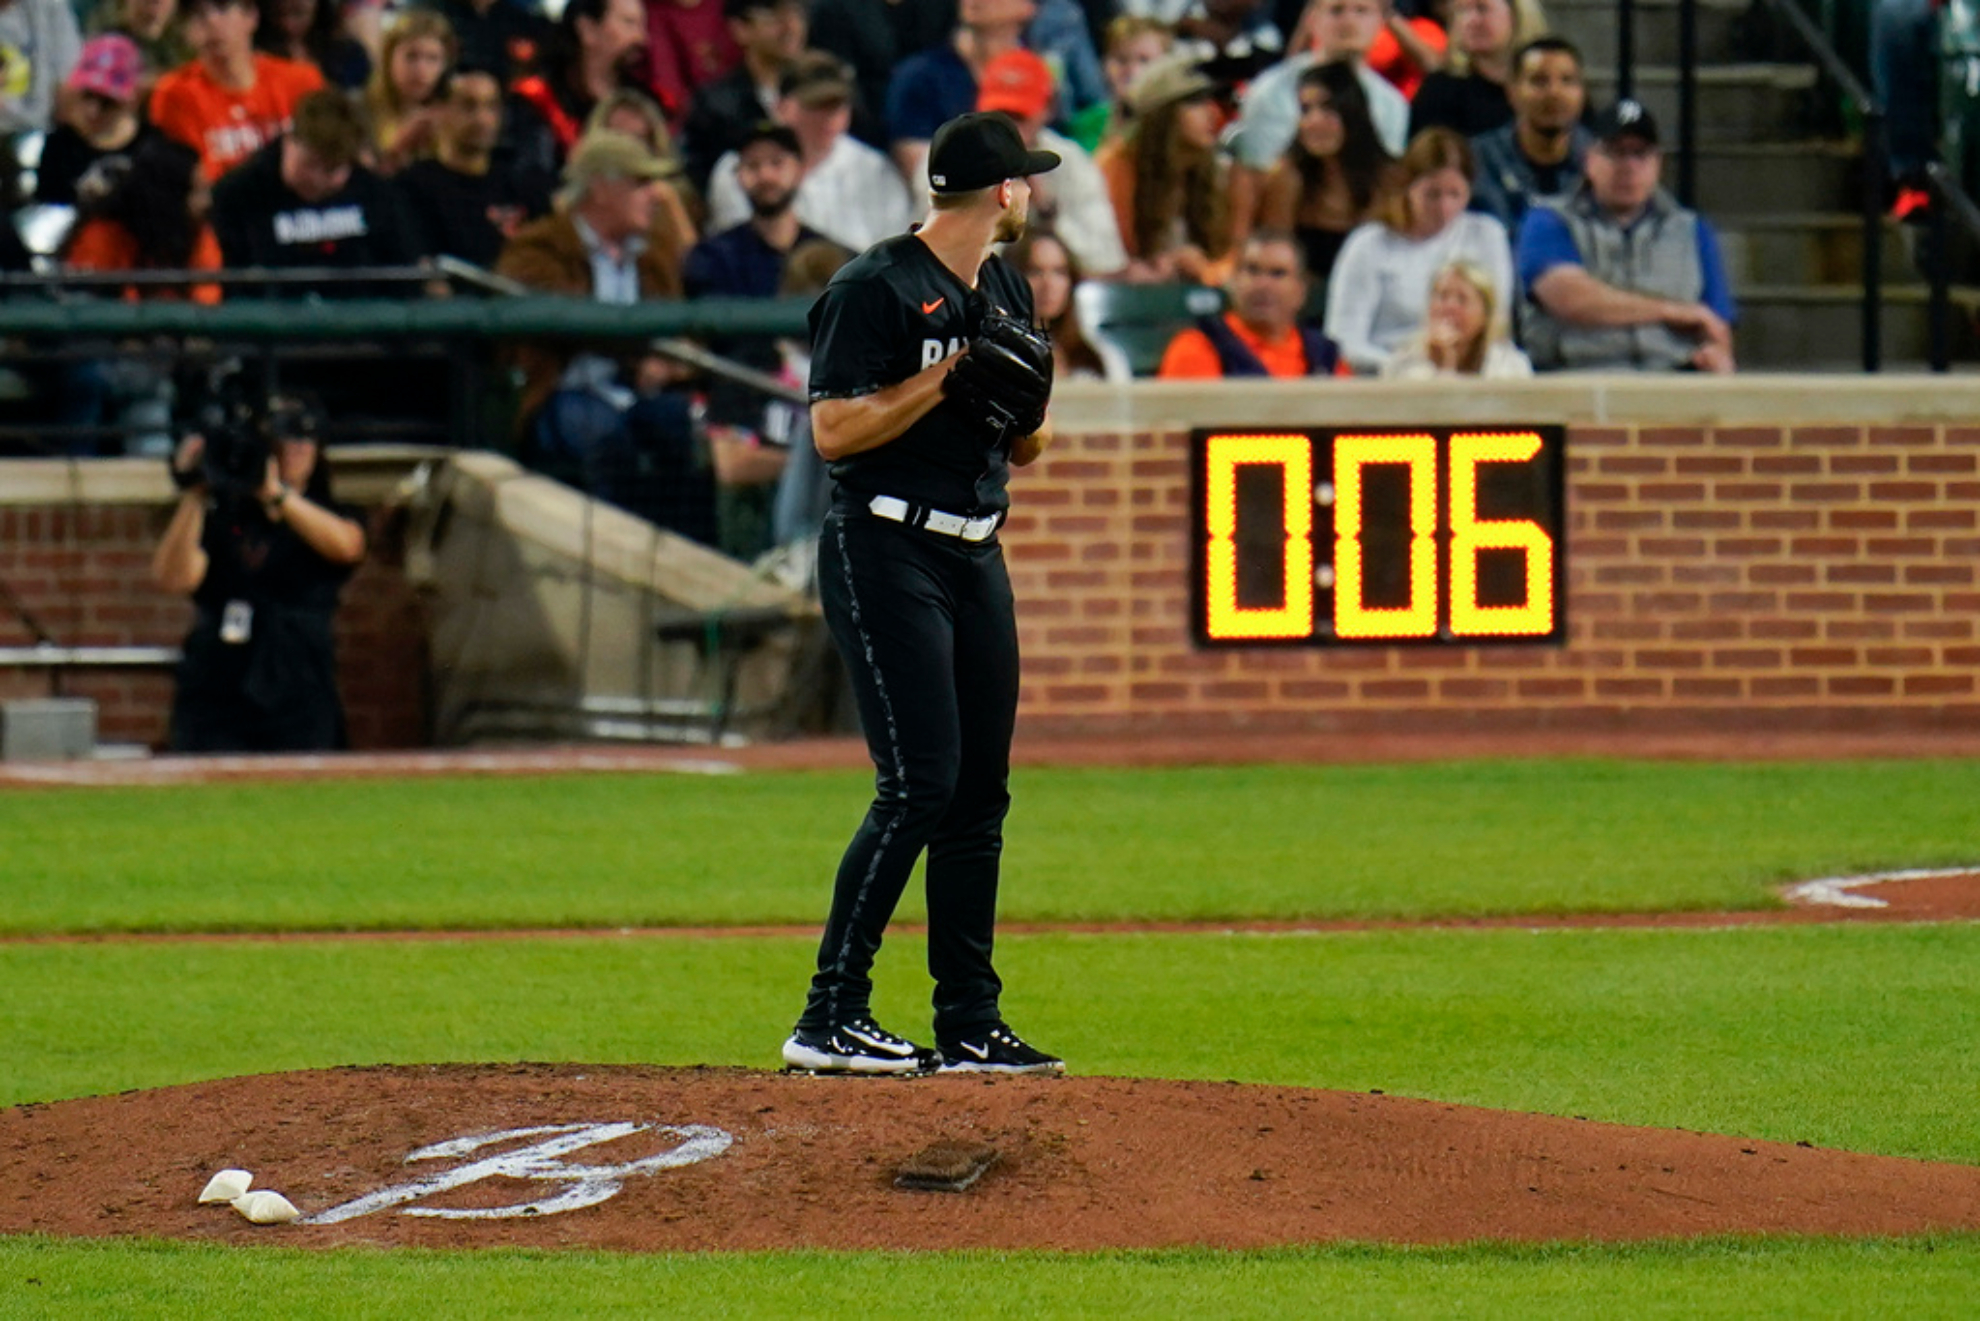 Pitch Clock World Series: Is there a pitch clock in the World Series?